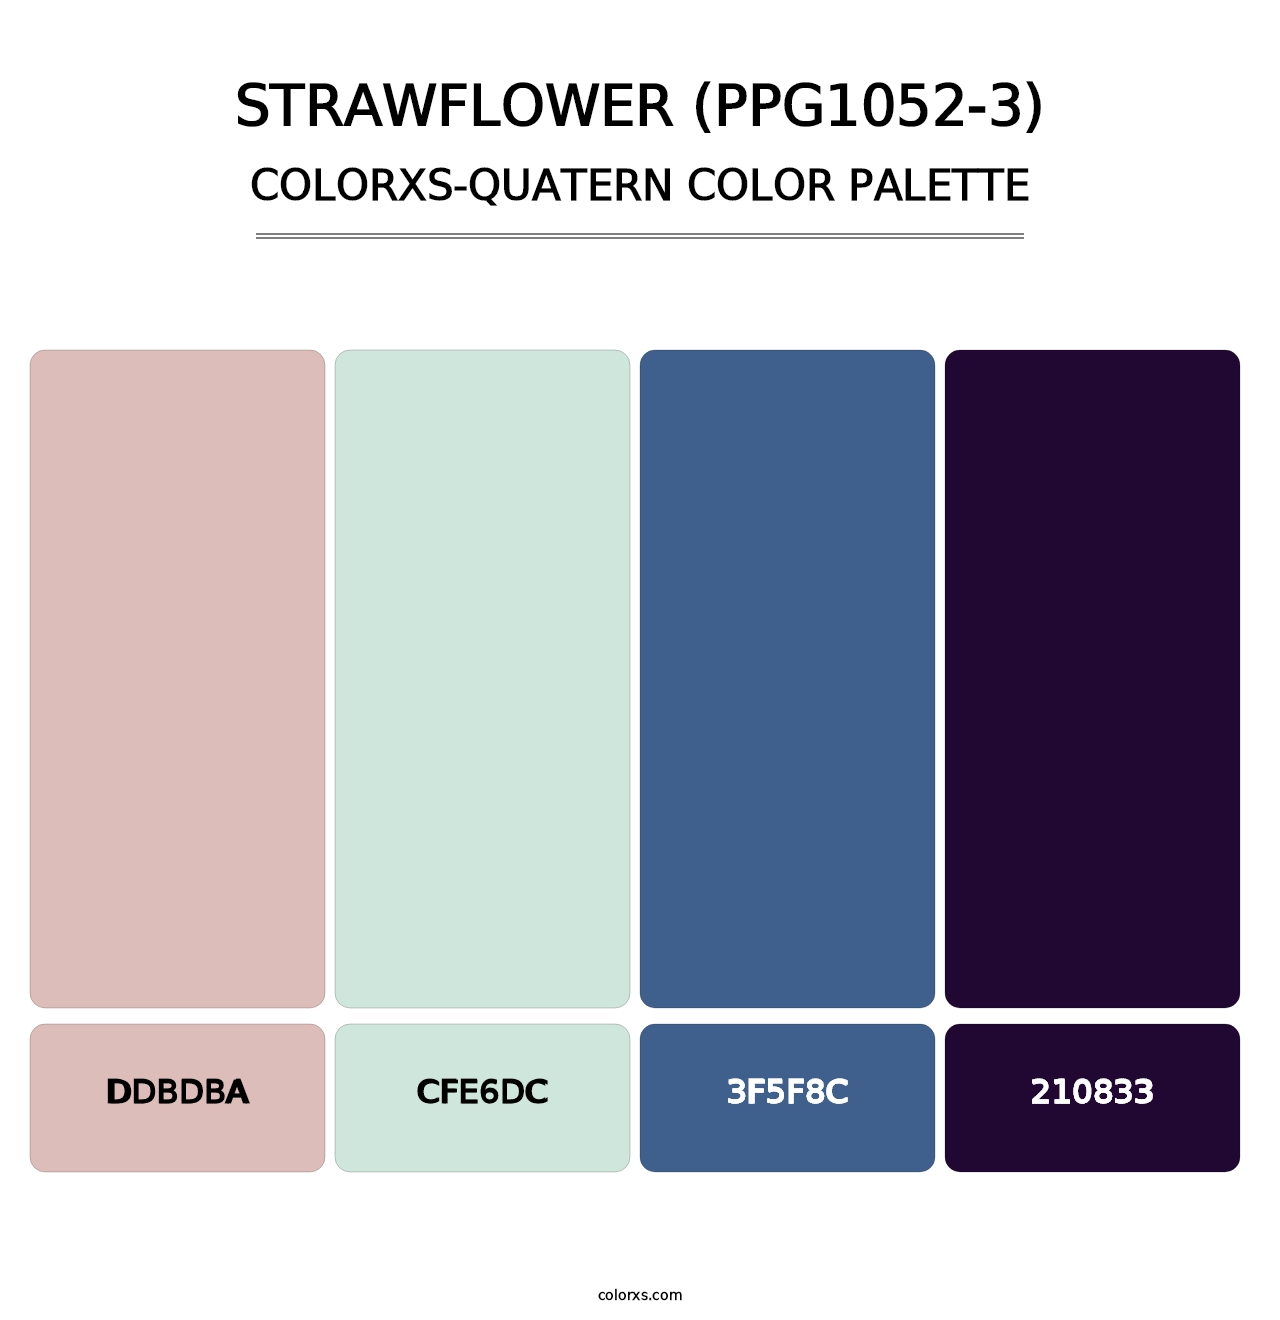 Strawflower (PPG1052-3) - Colorxs Quatern Palette